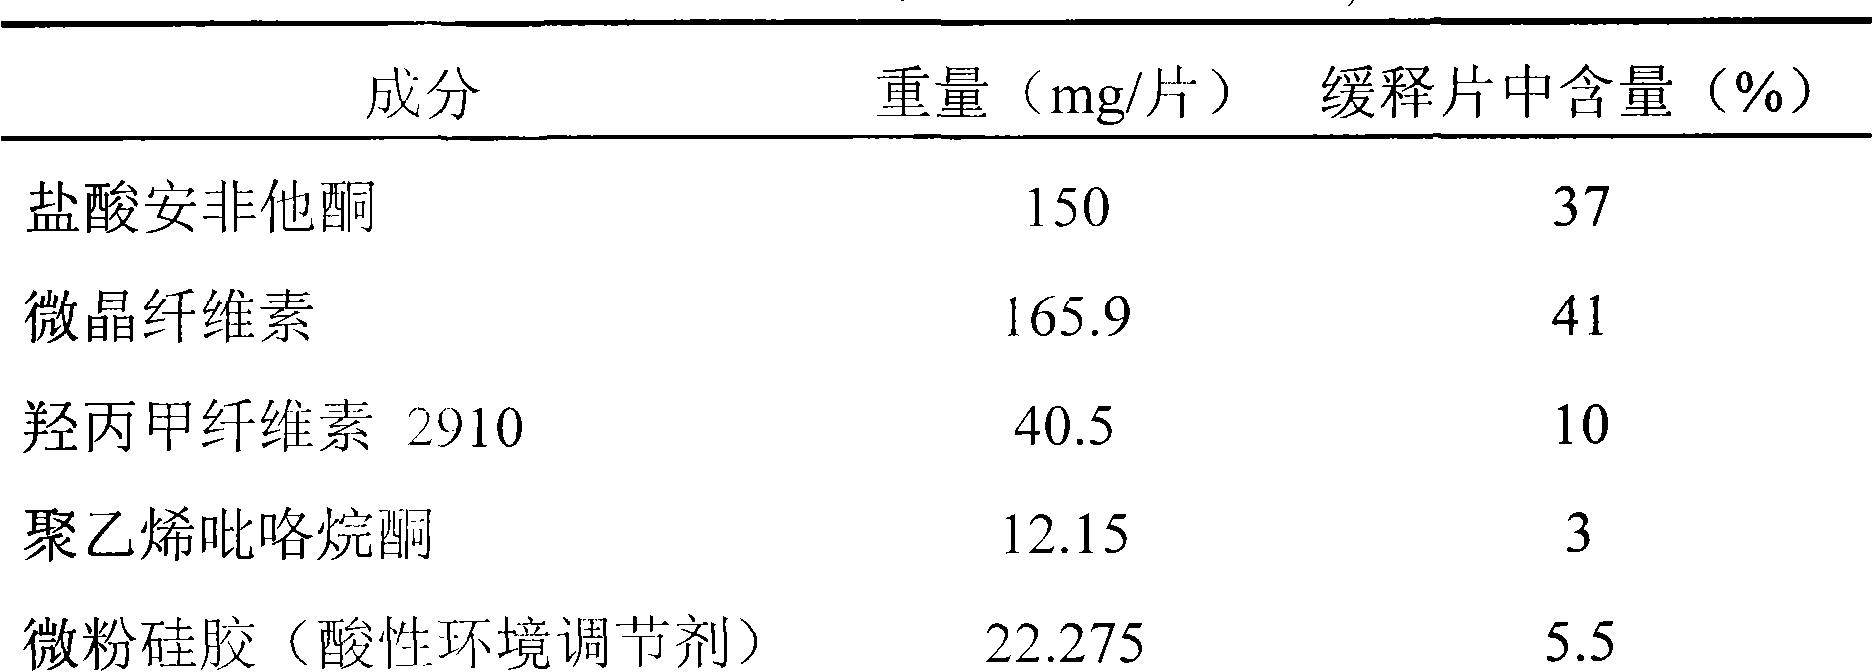 Bupropion hydrochloride sustained release tablets and preparation method thereof